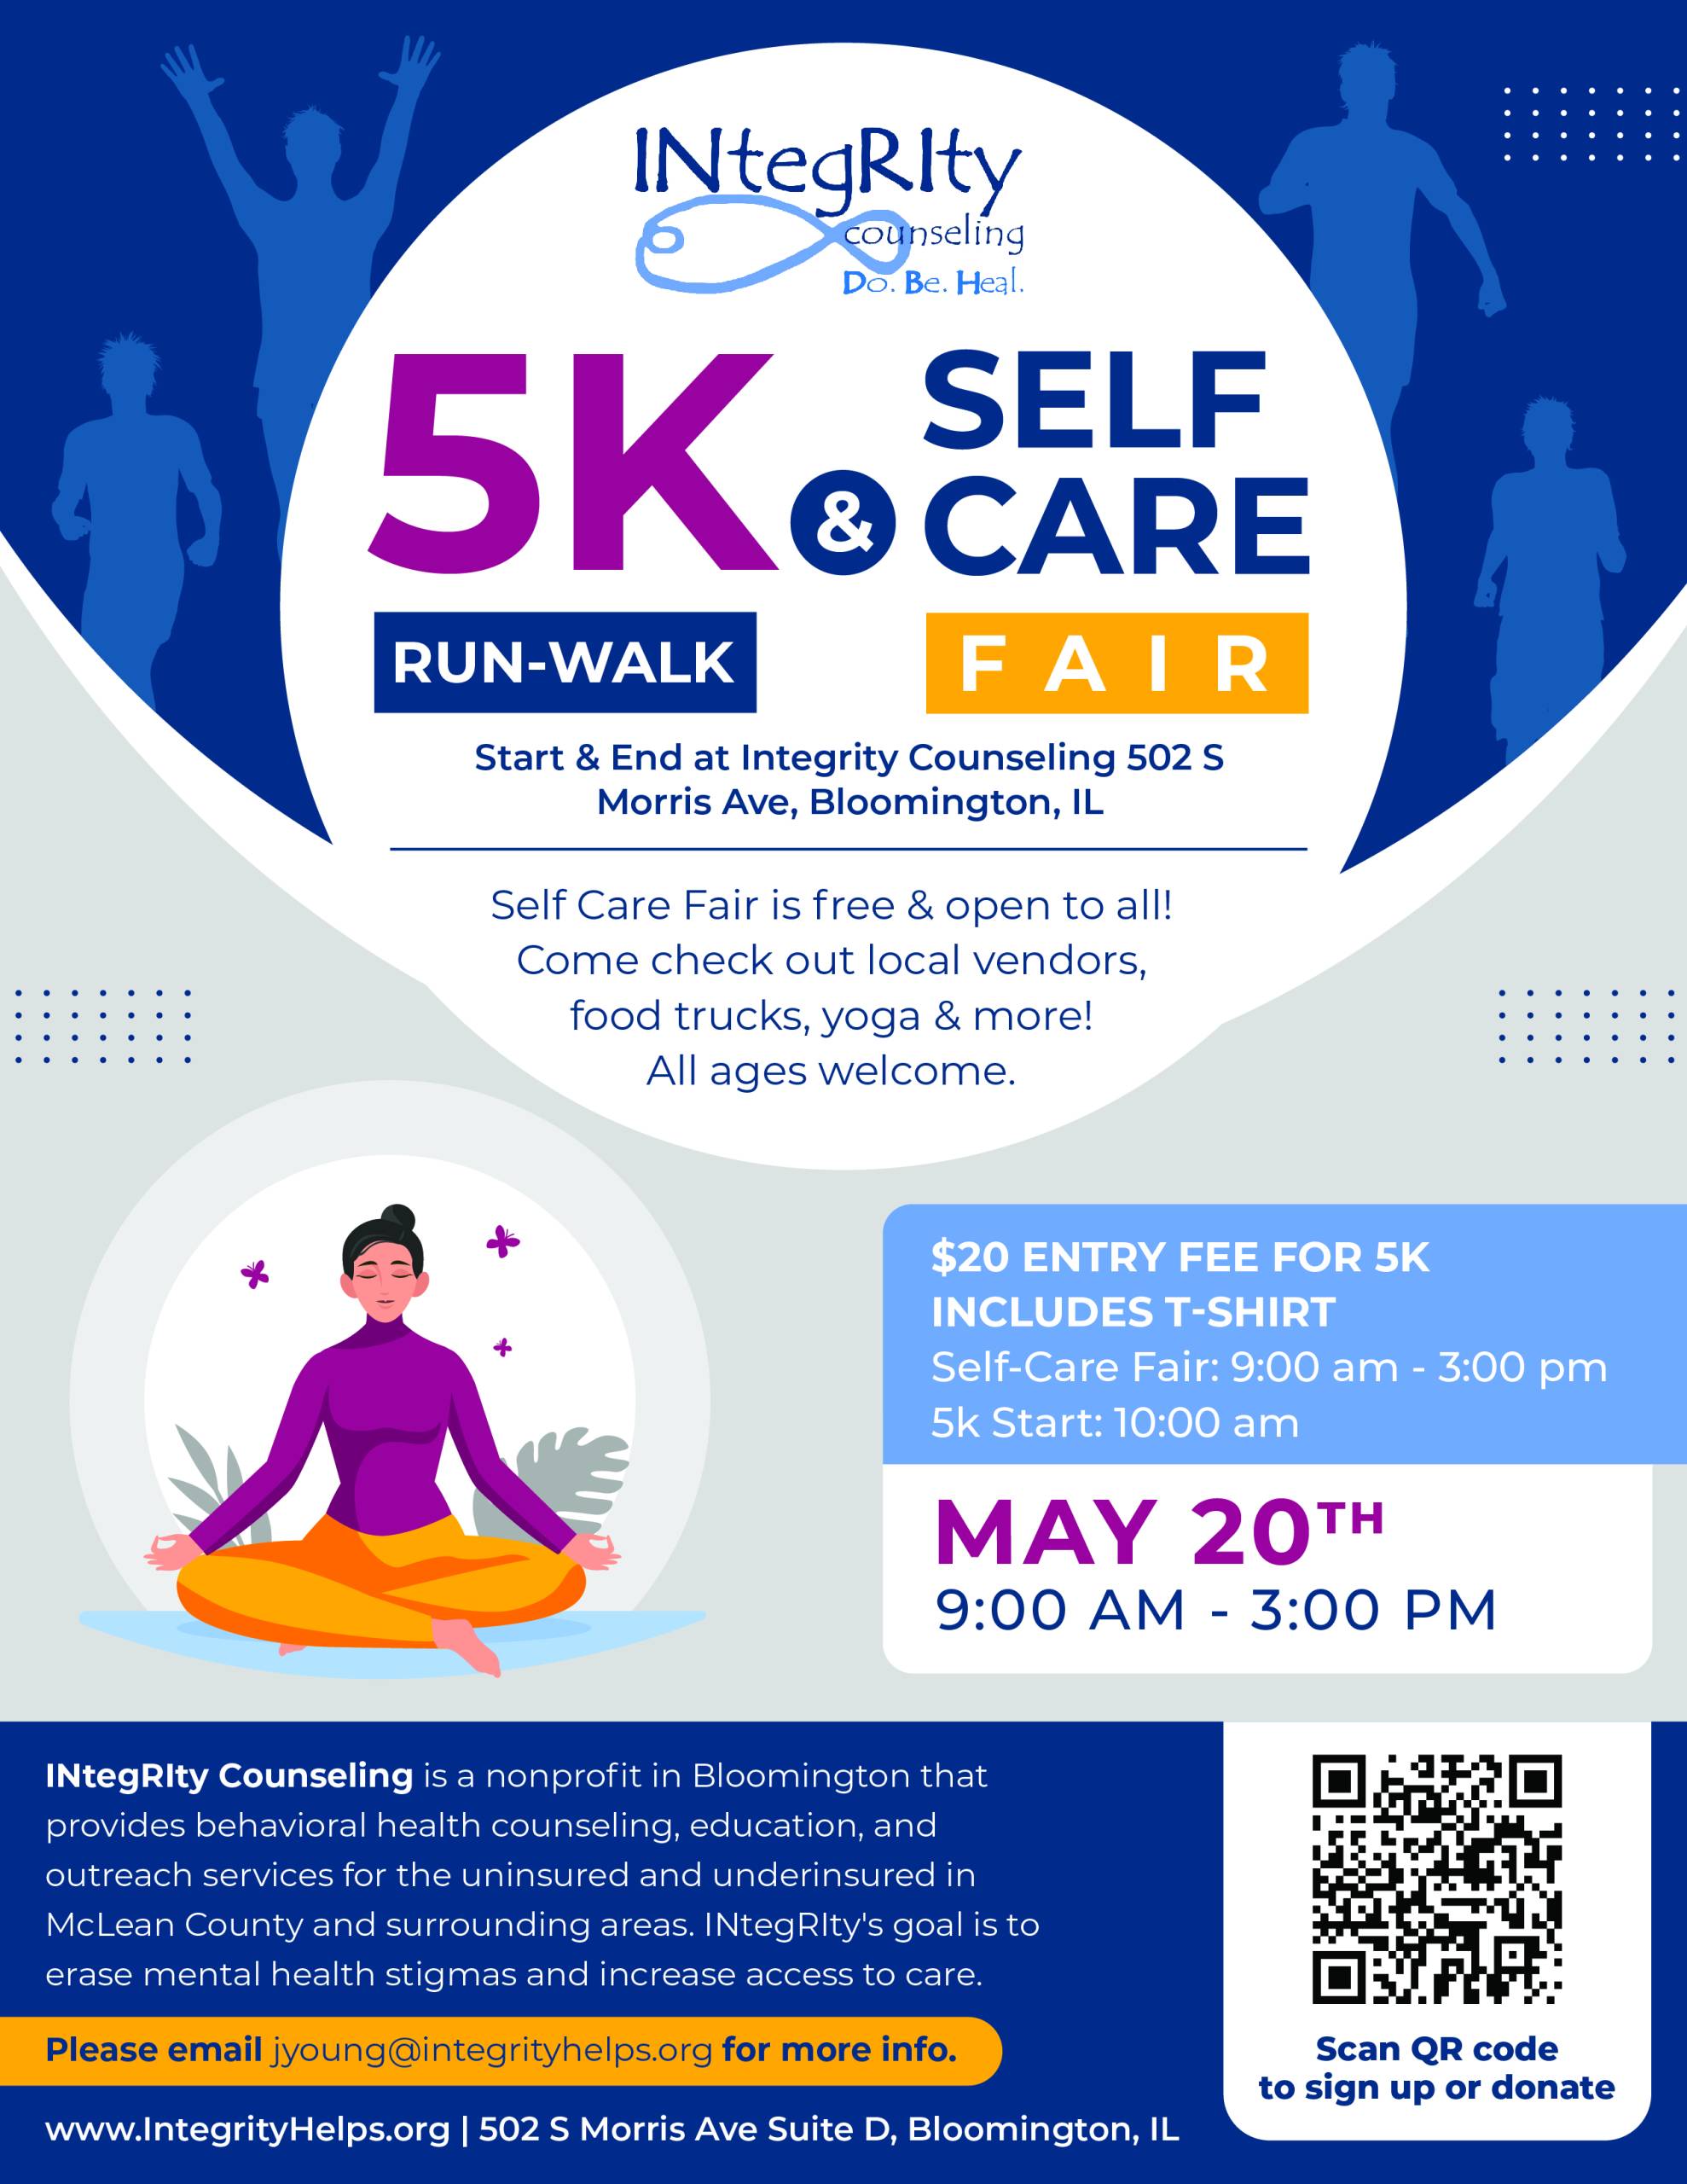 INtegRIty Counseling 5K Self Care Fair